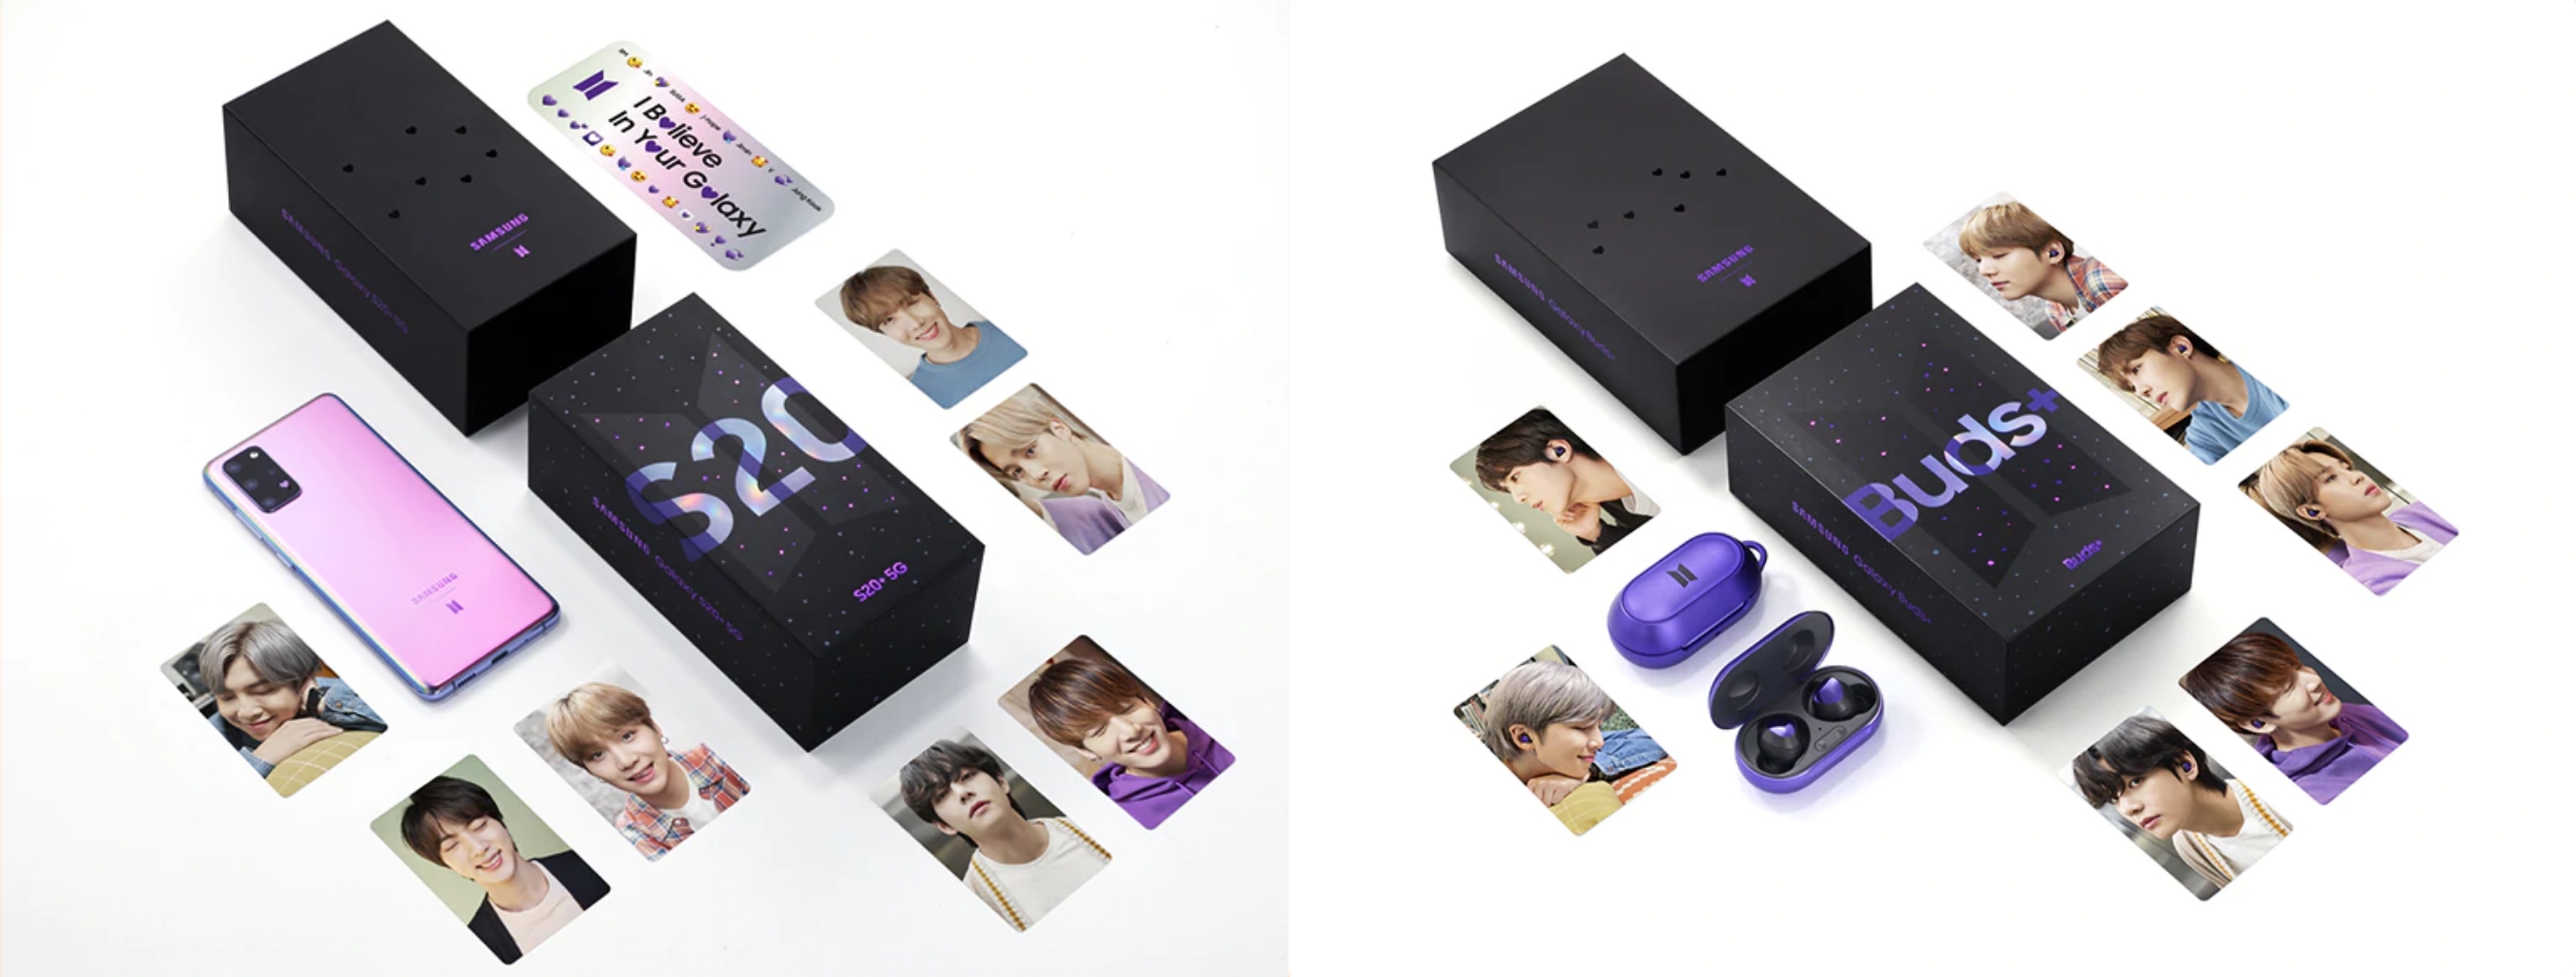 [Samsung X BTS] Galaxy S20+ 5G | Buds + BTS Edition Package "Sold Out